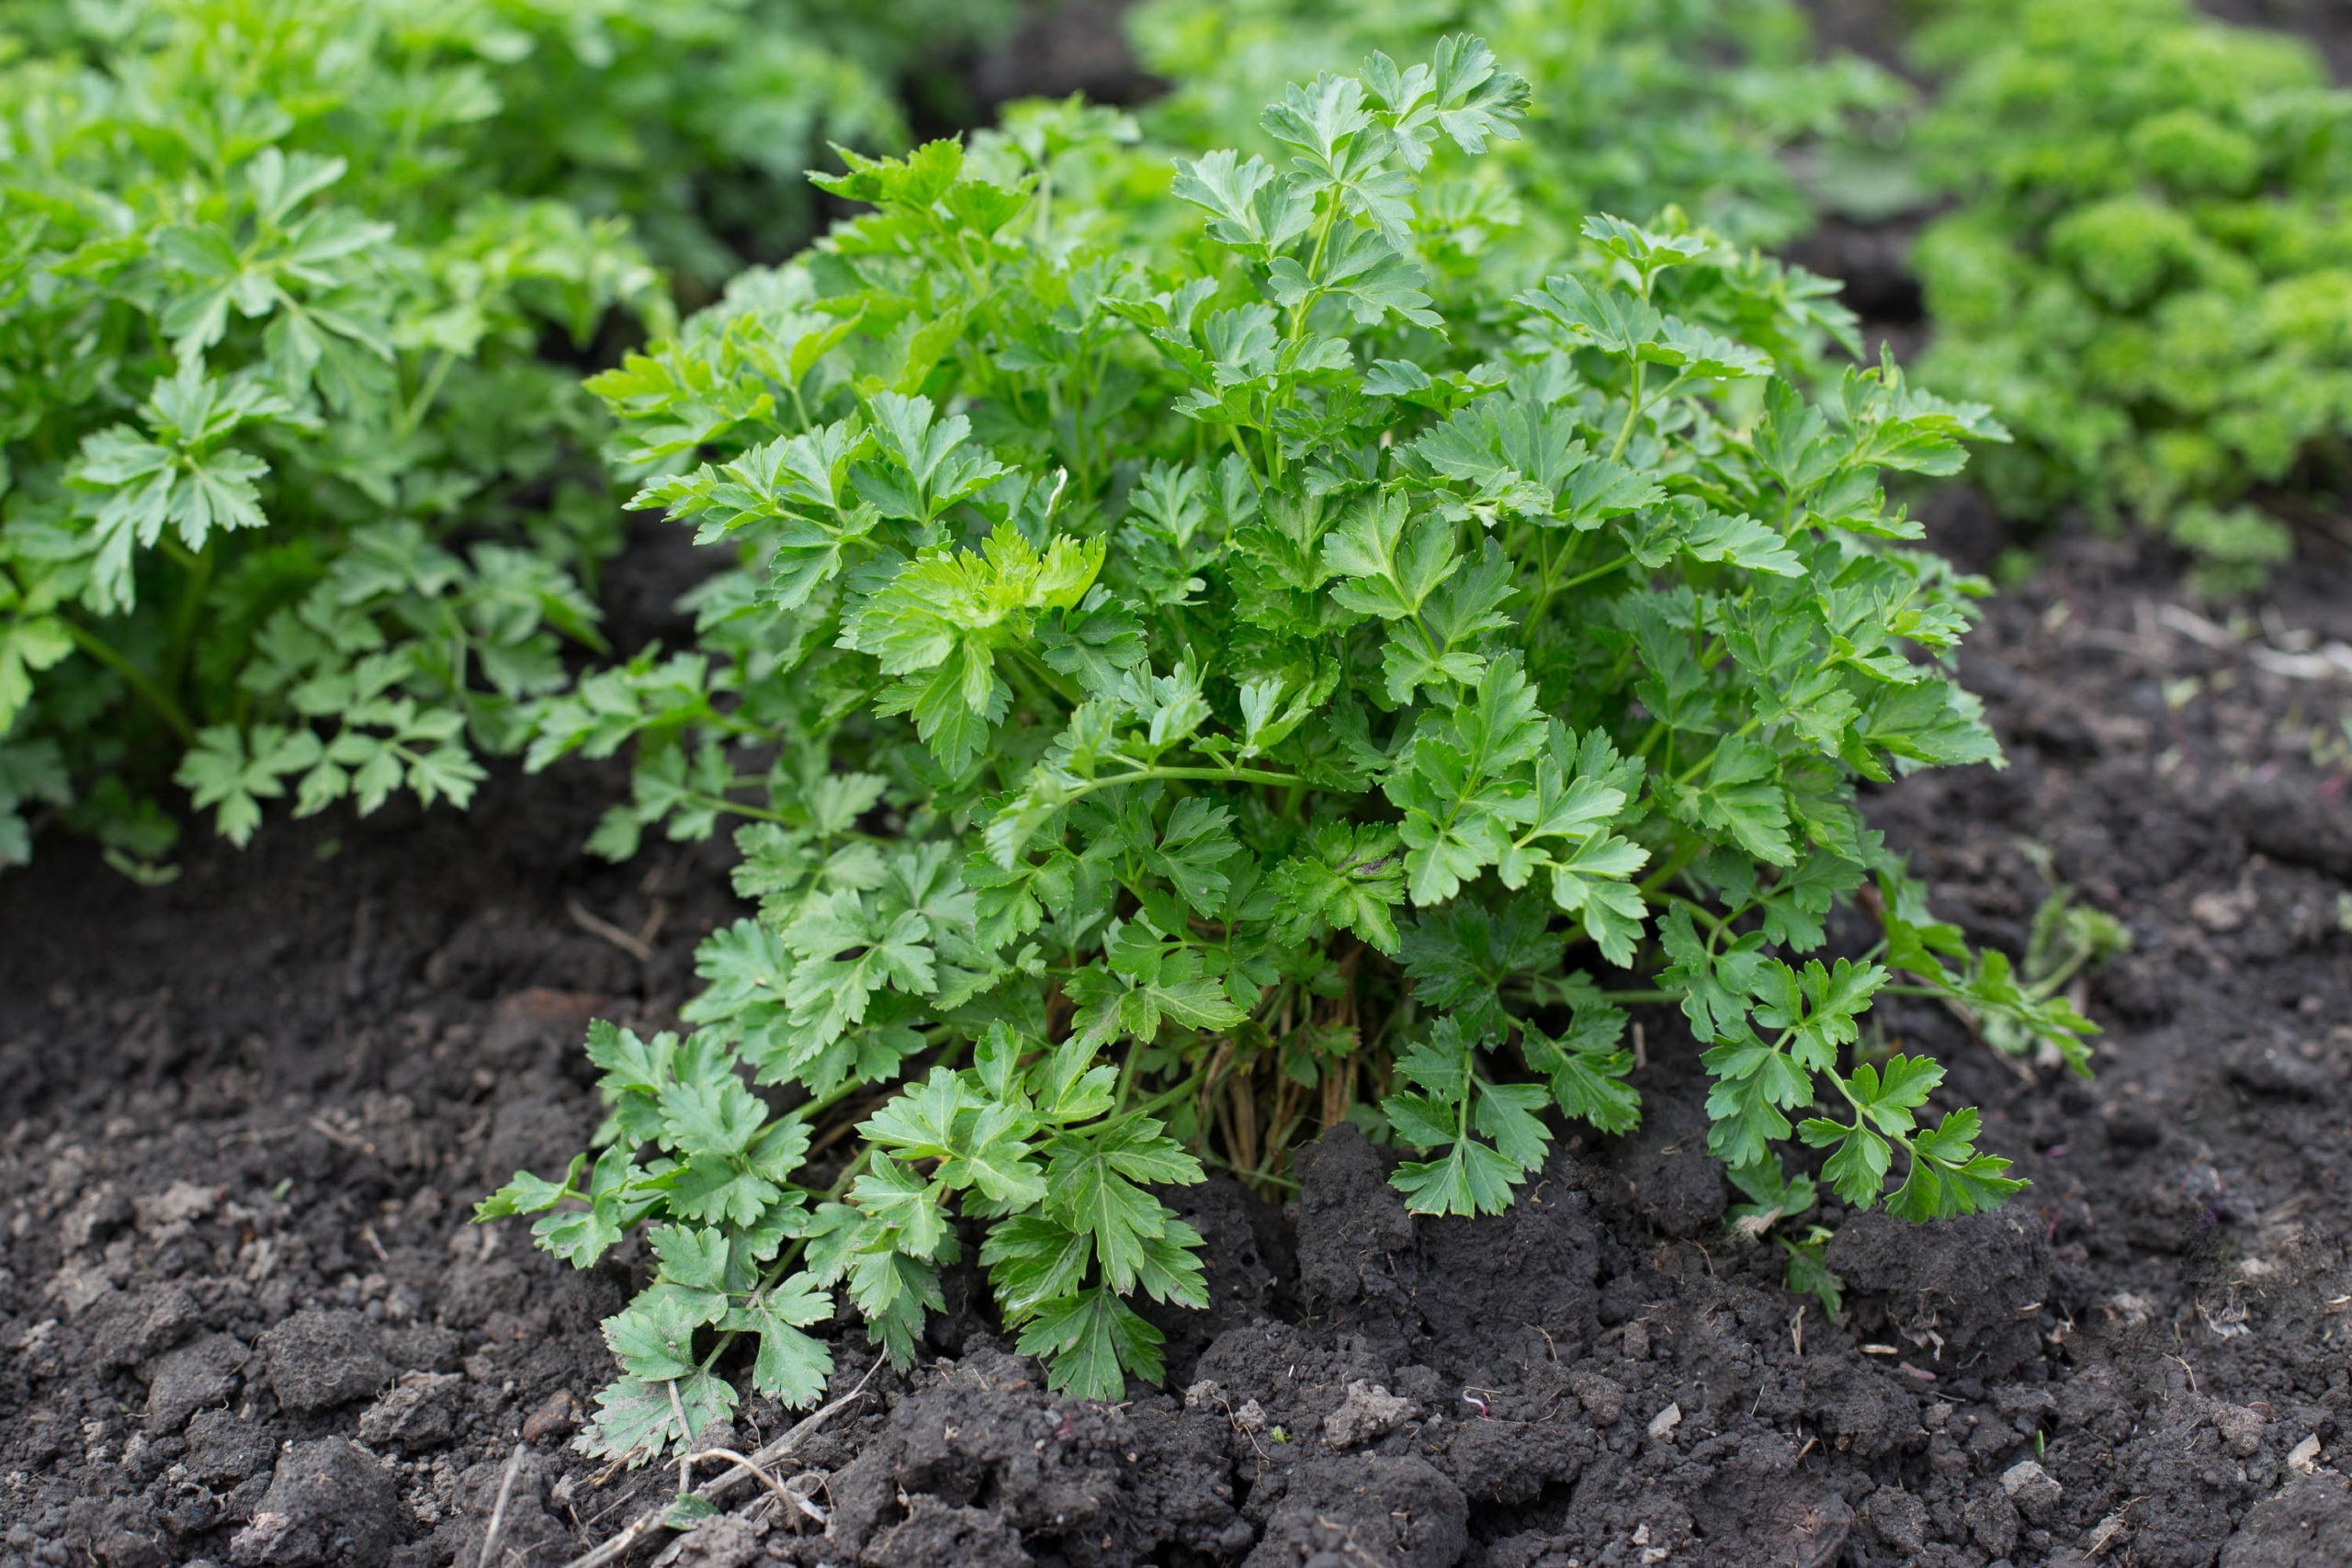 Growing Parsley: 5 Tips for Getting Started